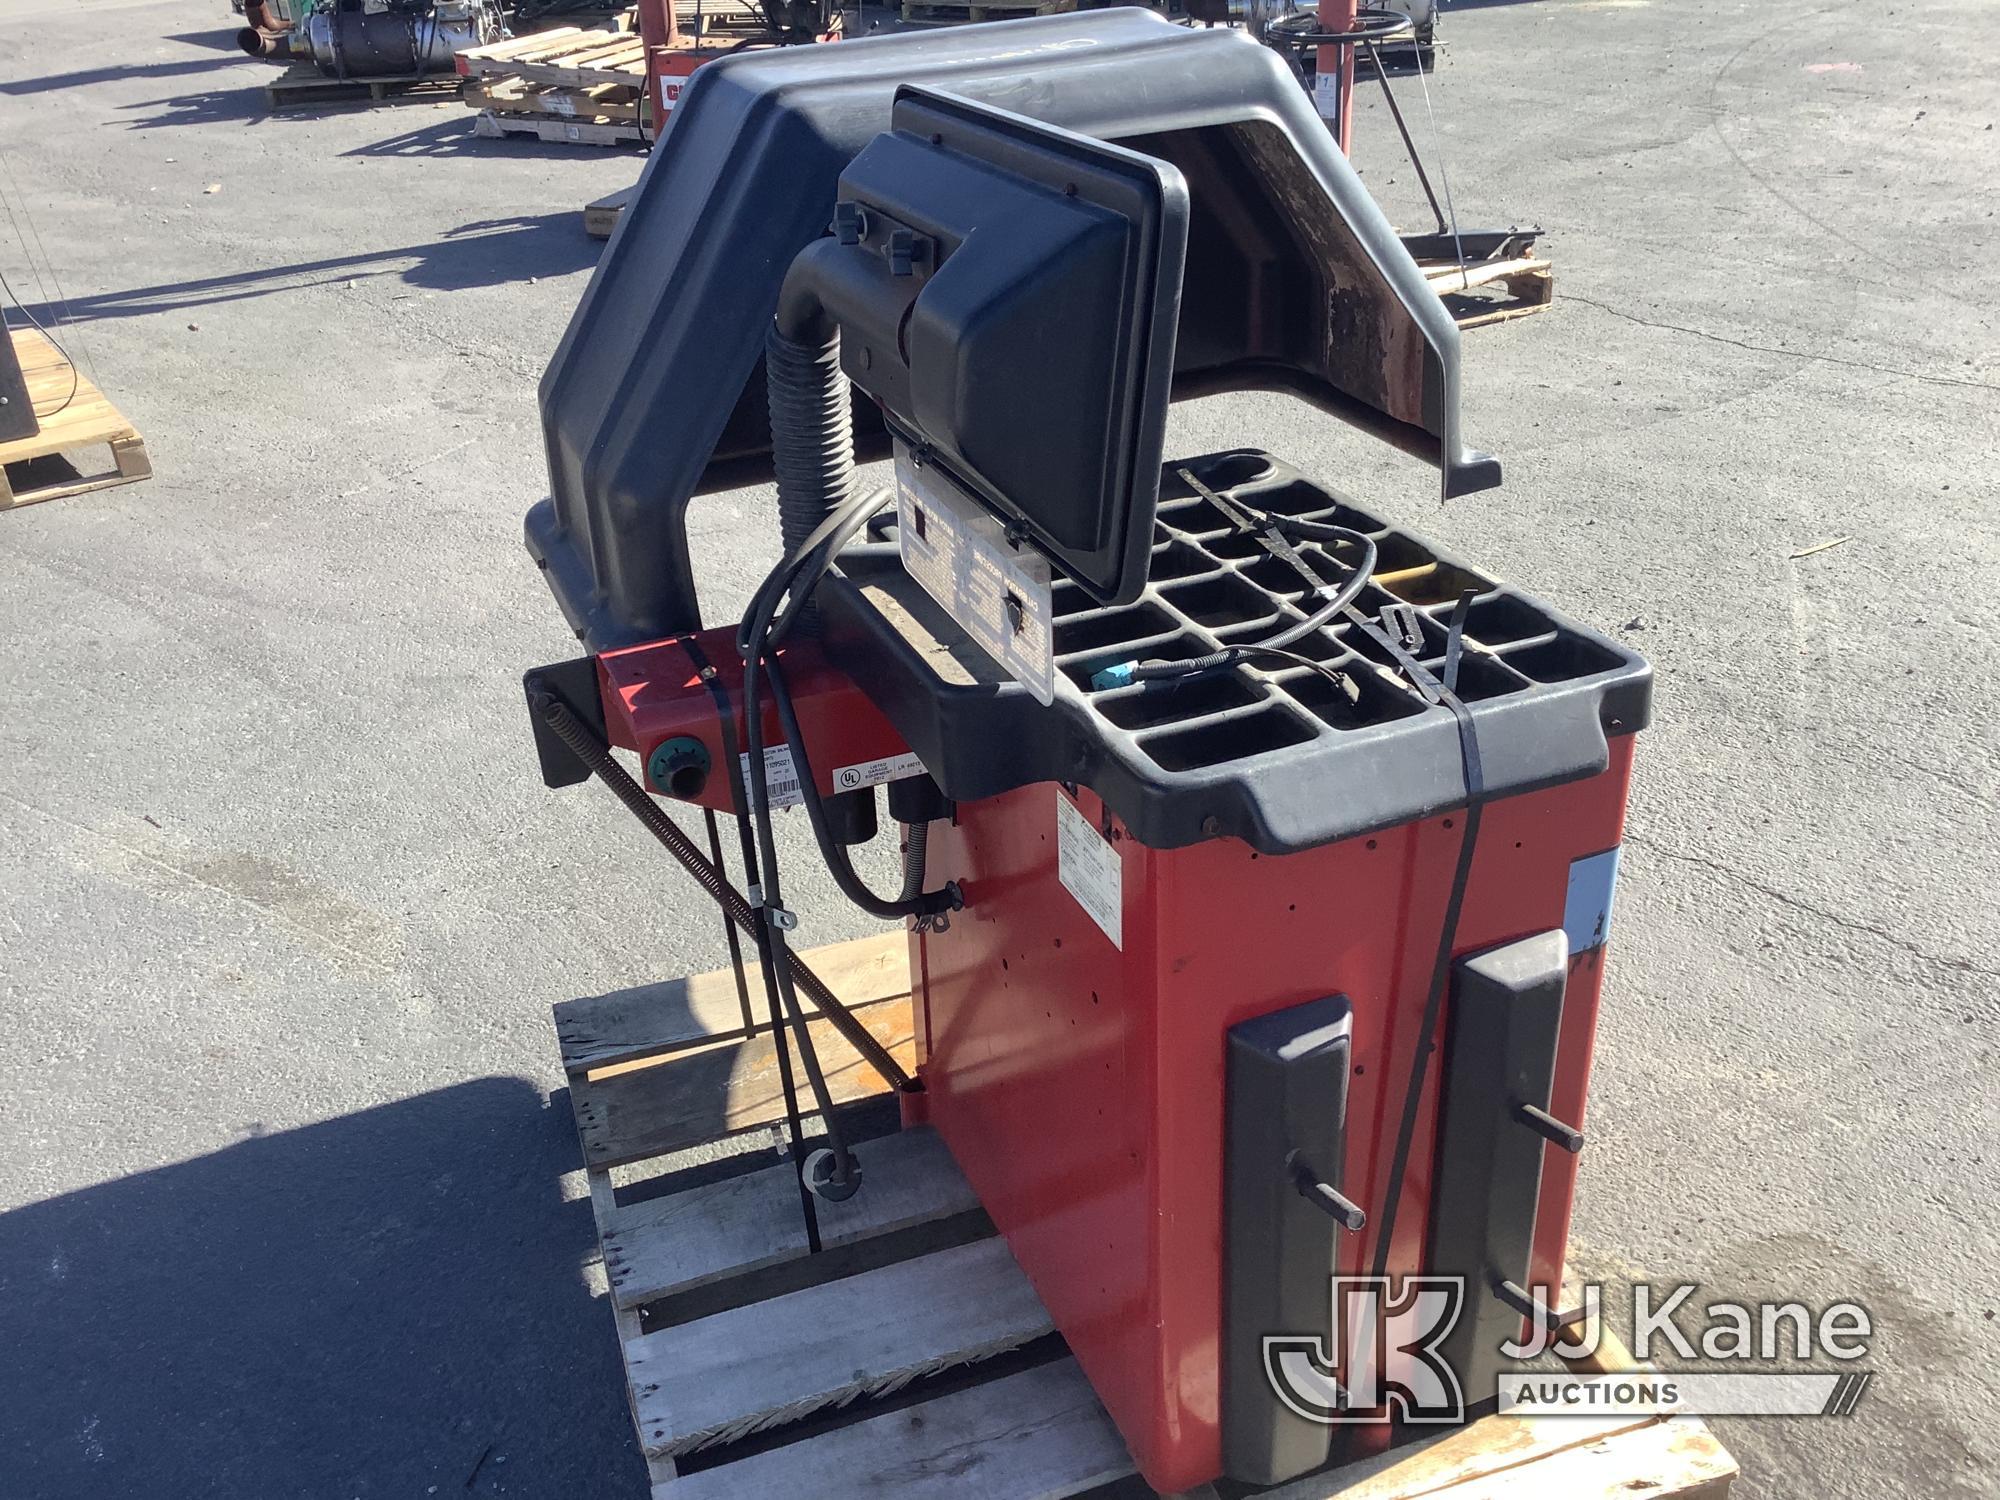 (Jurupa Valley, CA) 1 Coats Tire Balancer (Used) NOTE: This unit is being sold AS IS/WHERE IS via Ti